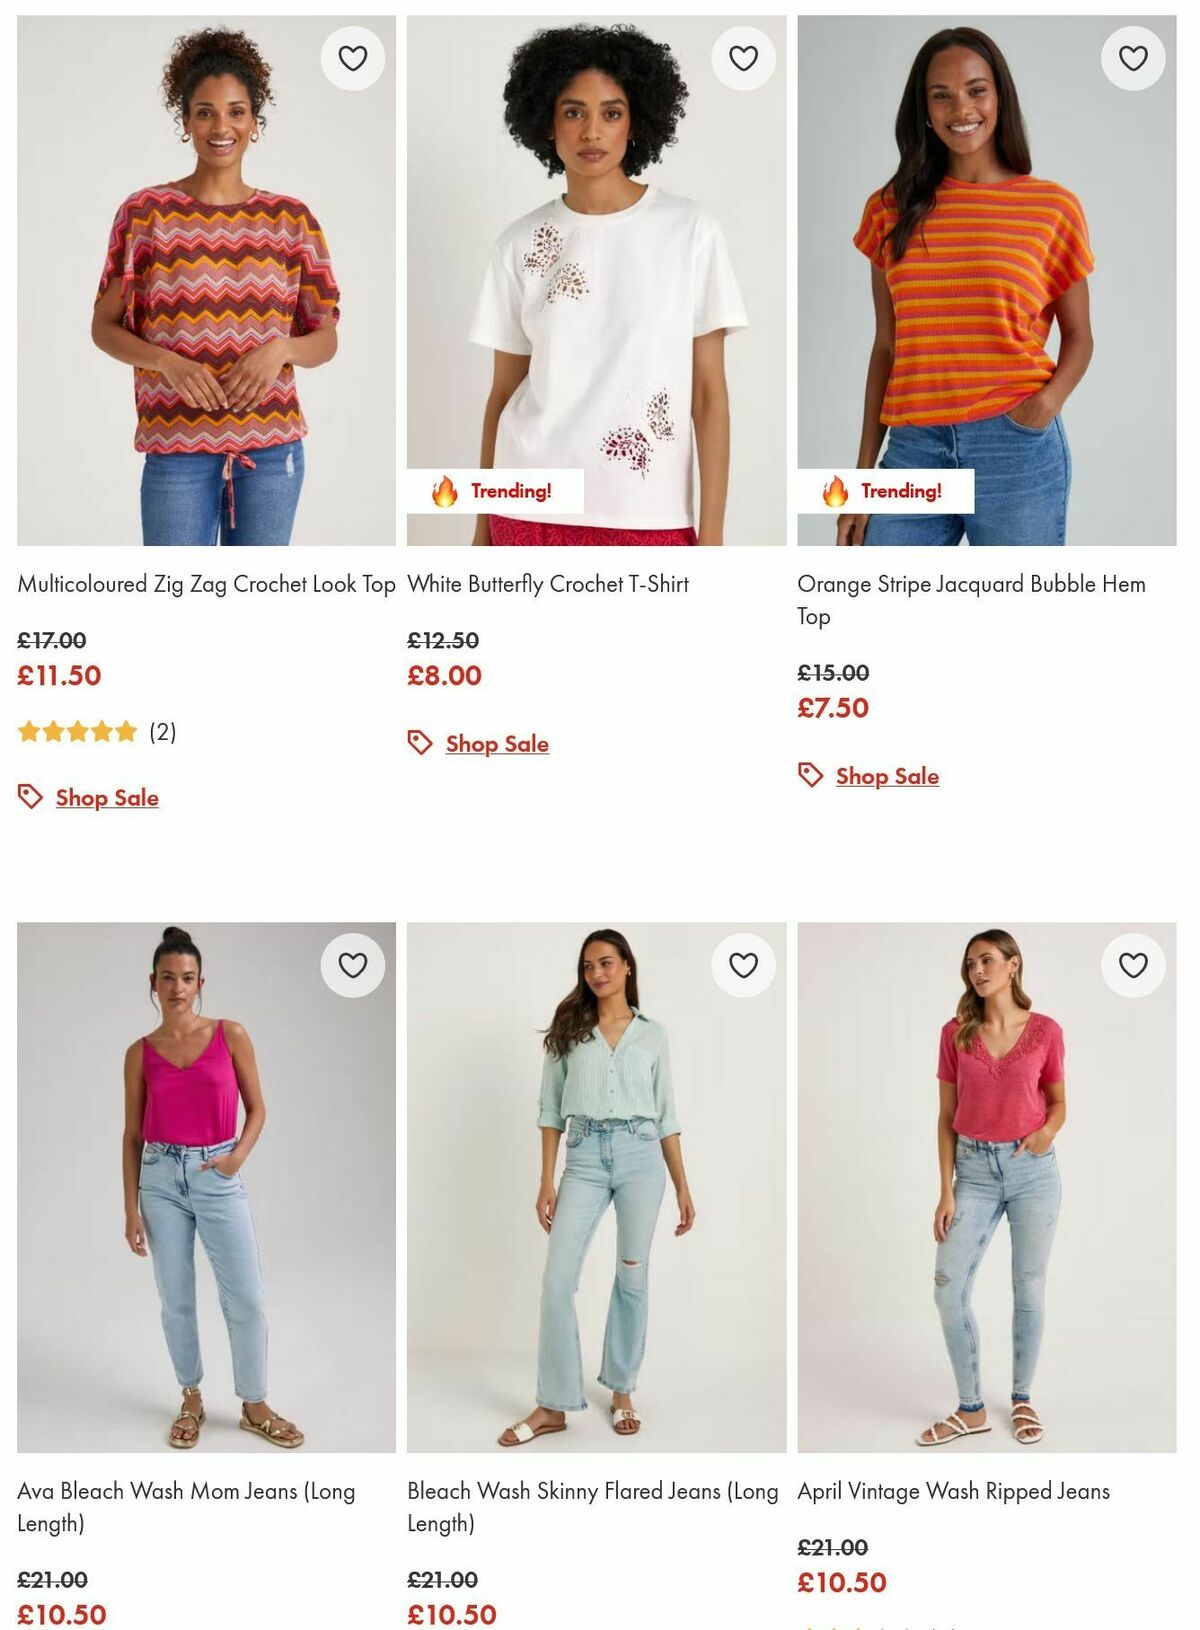 Matalan Offers from 22 August